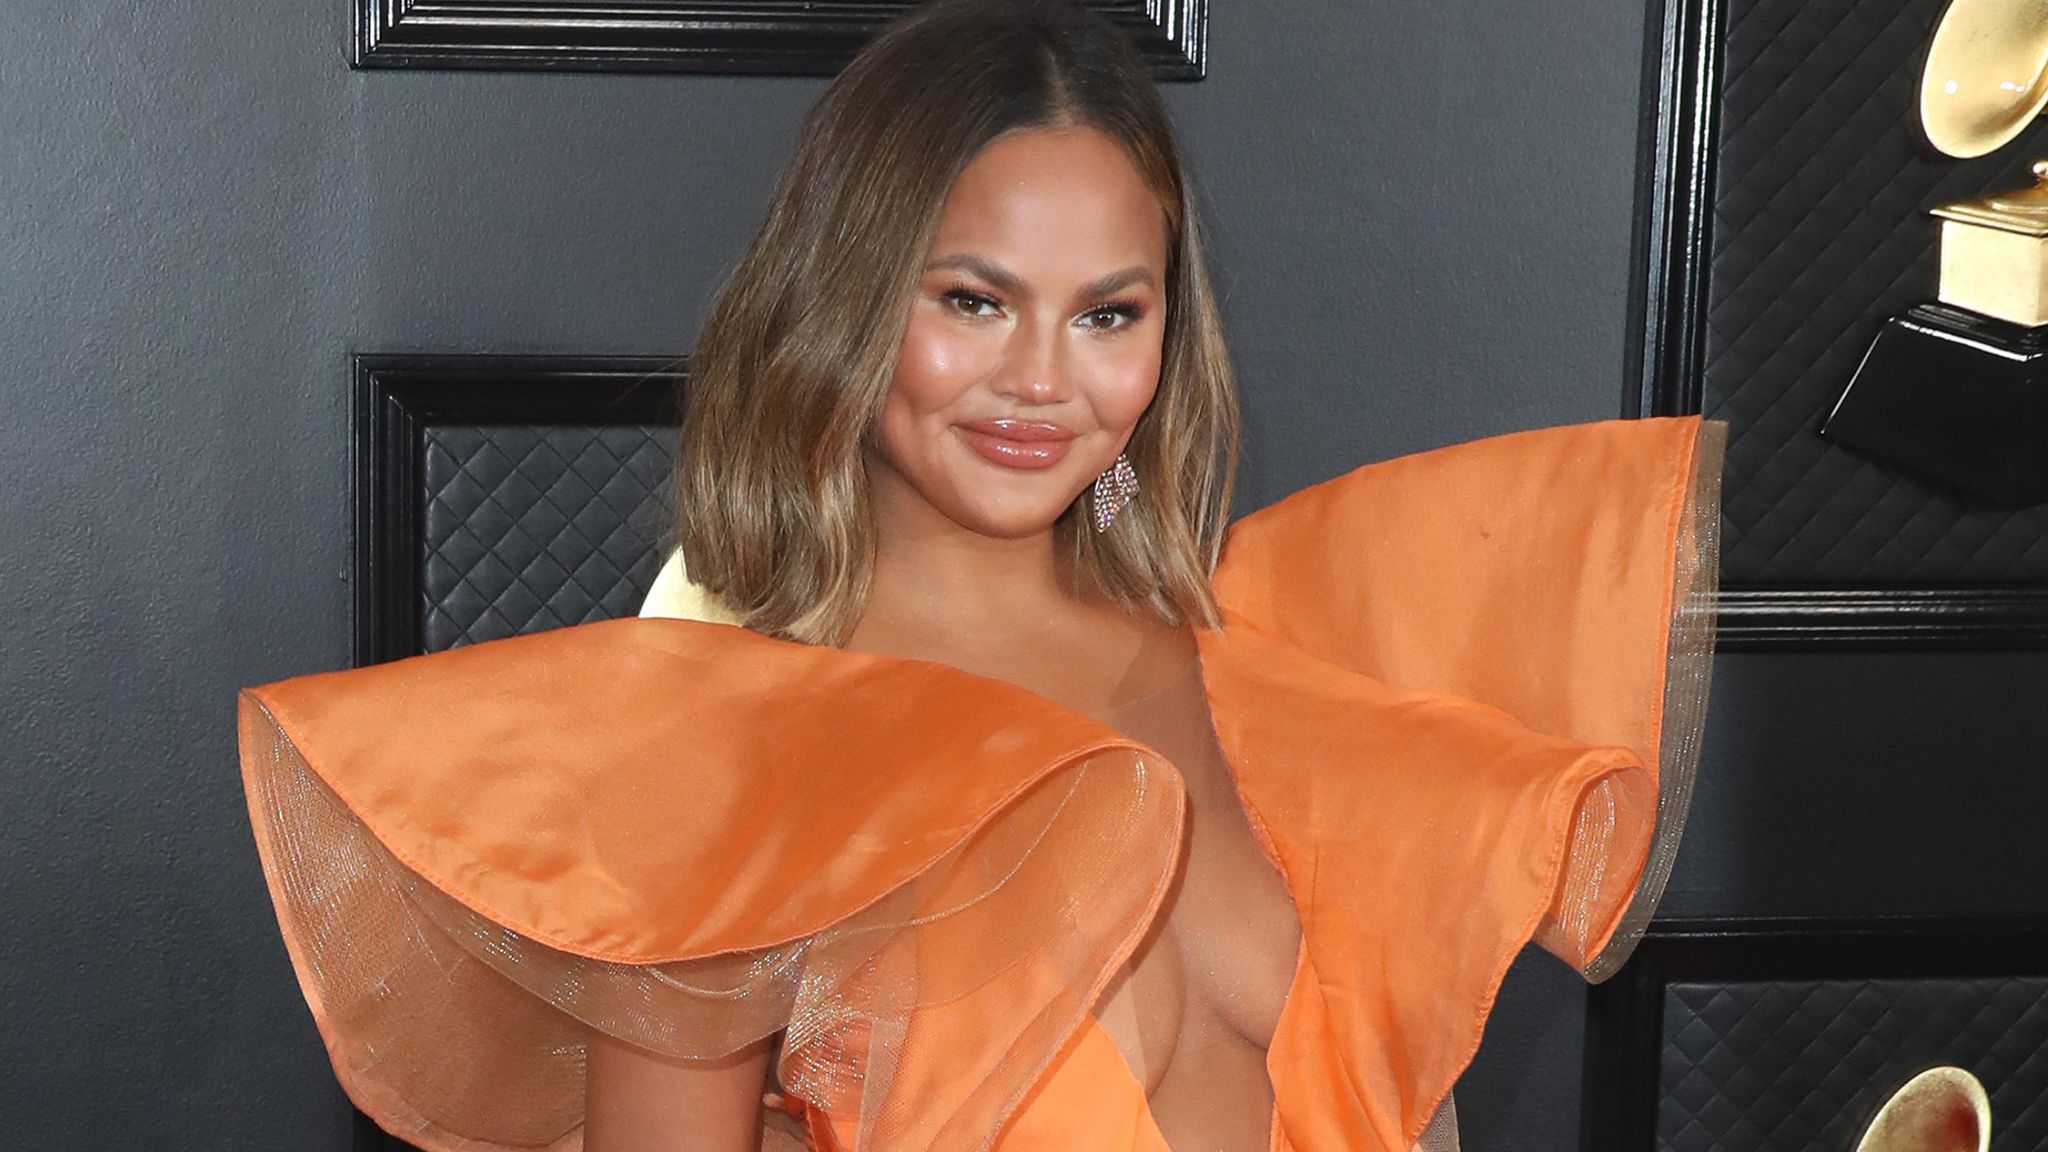 Chrissy Teigen announces breast implant removal after COVID-19